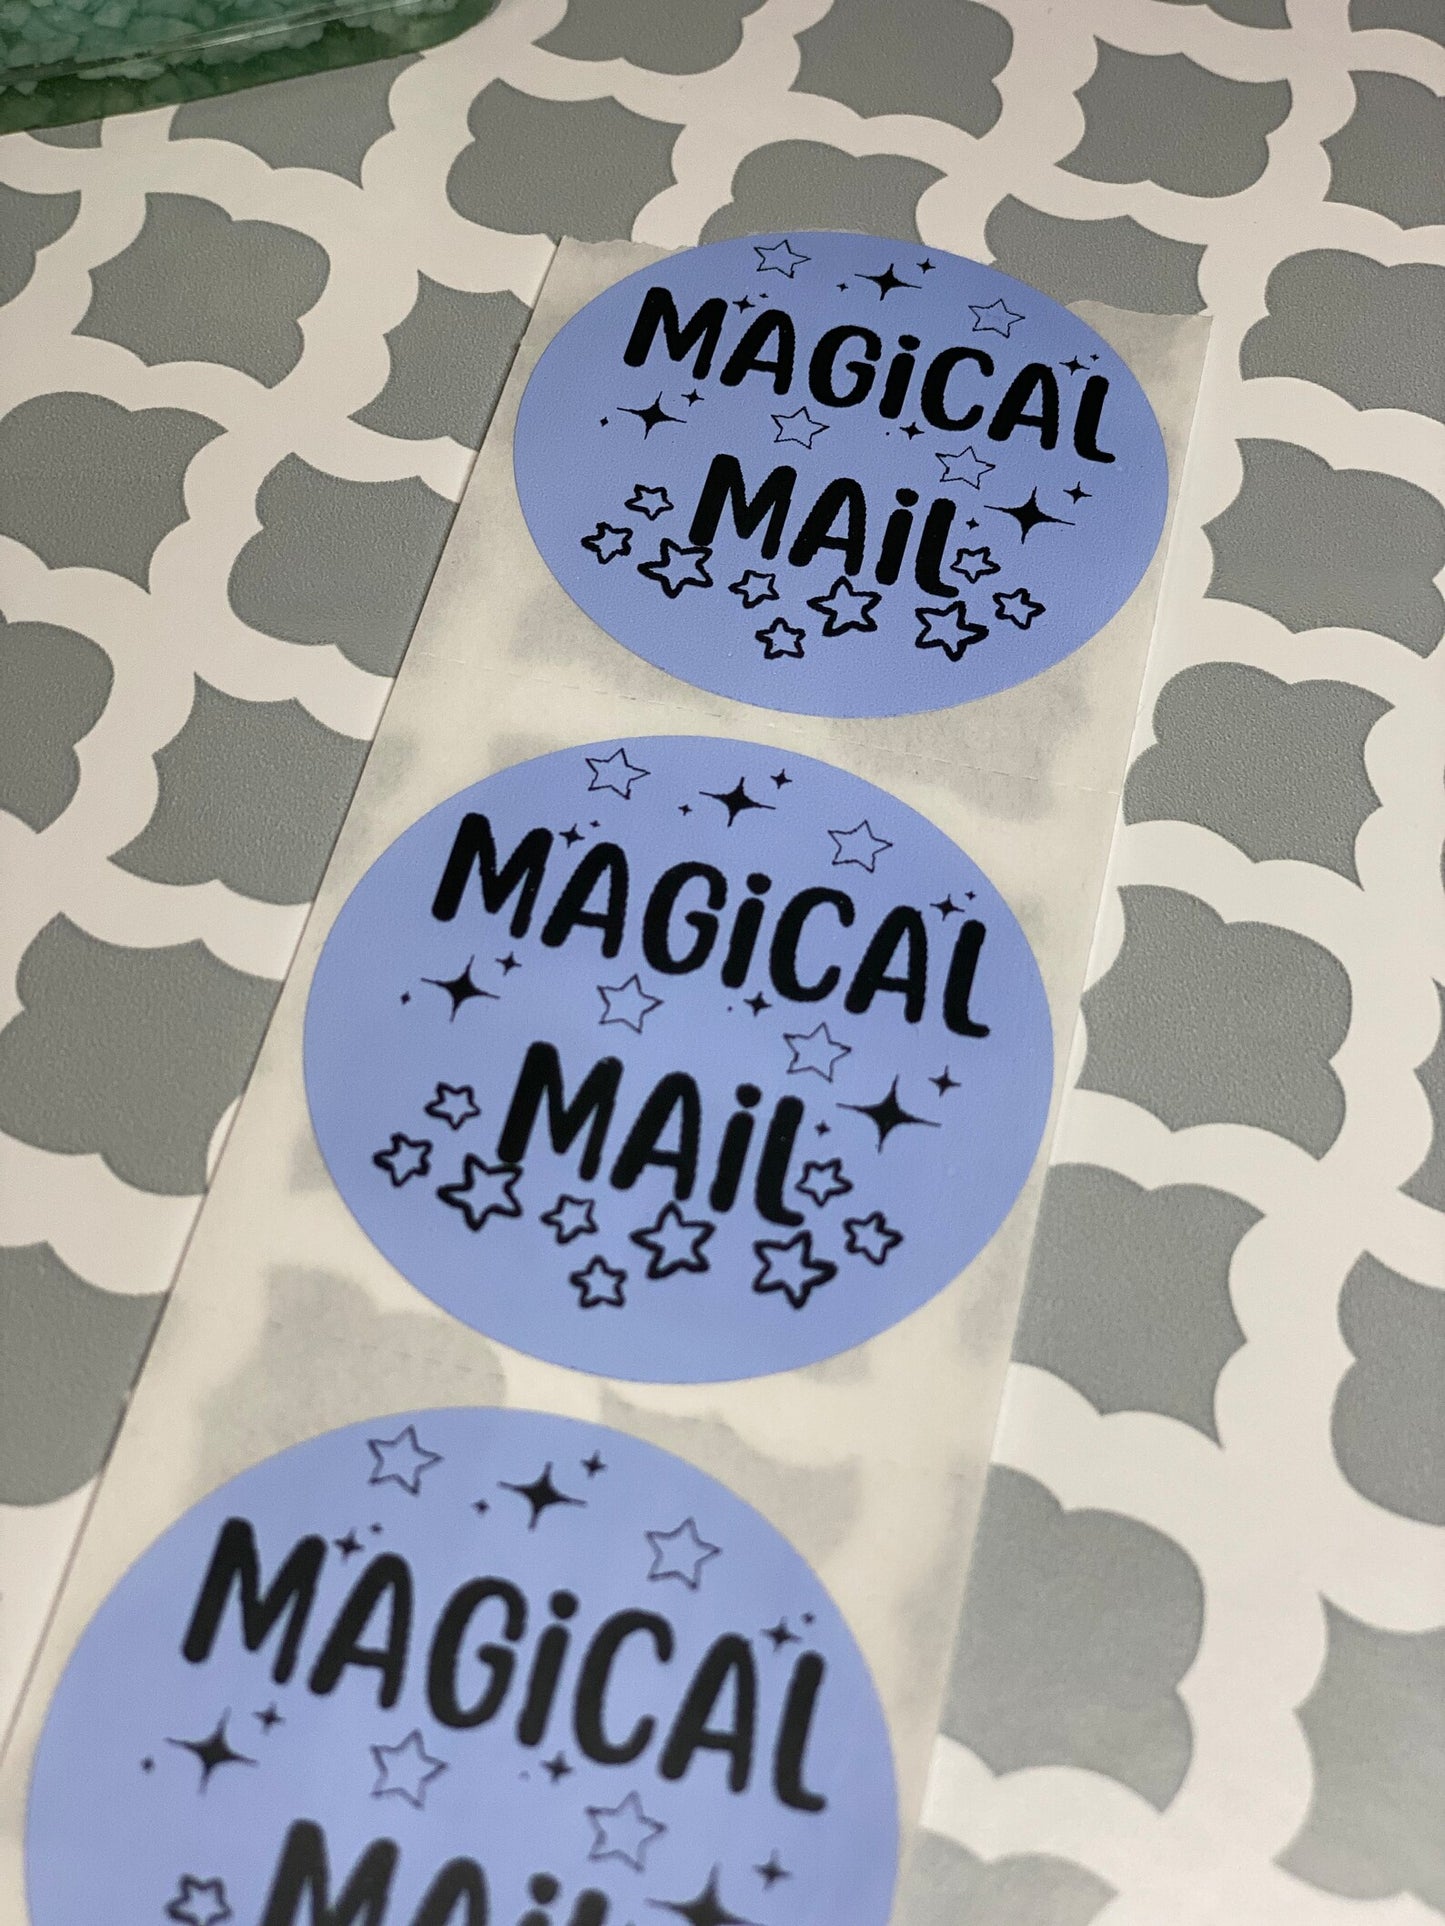 Magical Mail Thermal Printed Business Packaging Stickers